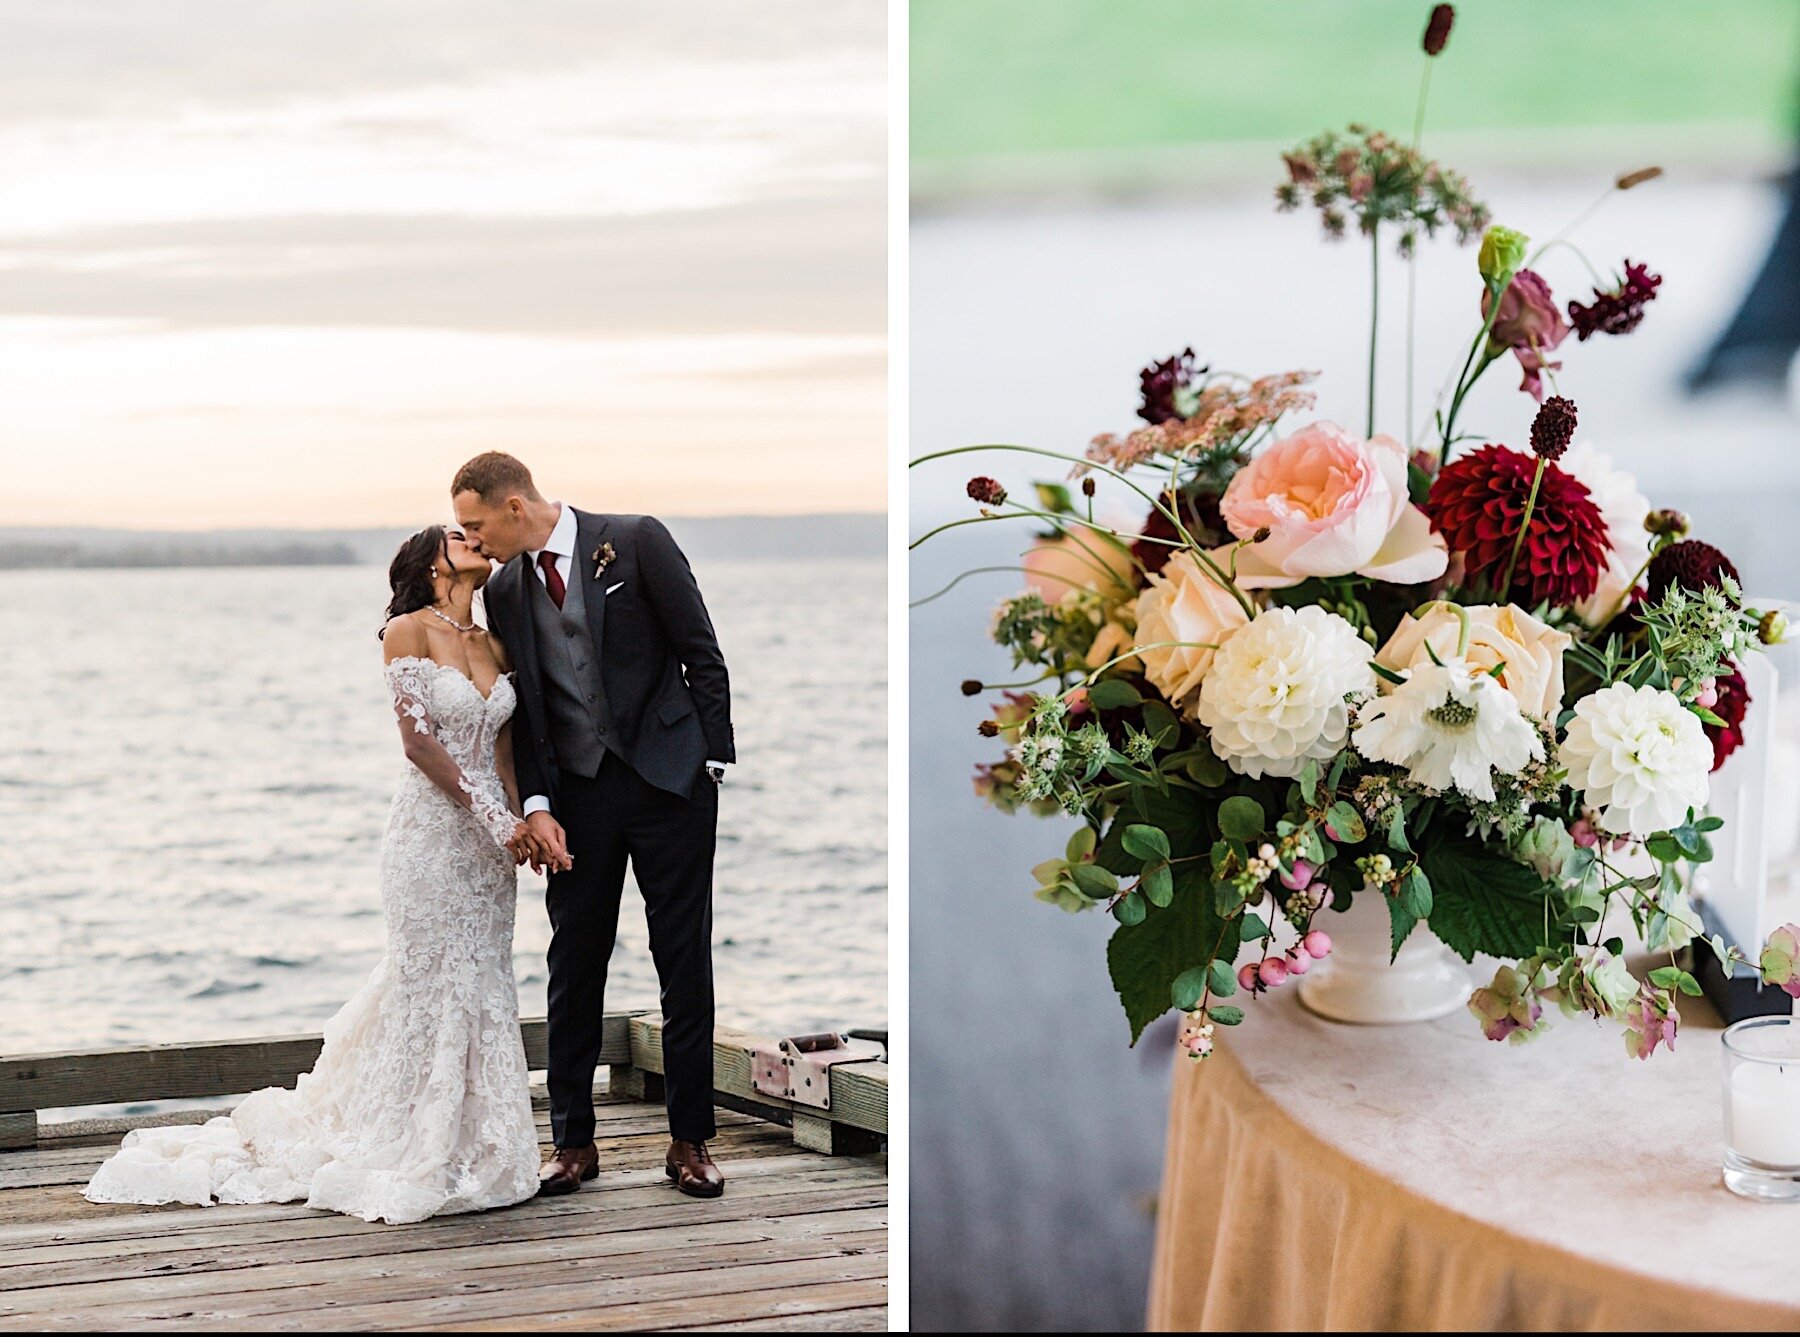 17_shaxton-ngo-444_shaxton-ngo-374_A_Woodmark_floral_Seattle_with_Wedding_design_Hotel_from_Company_at_romantic_Design_the_Florist_wedding_Gather_lush_top.jpg